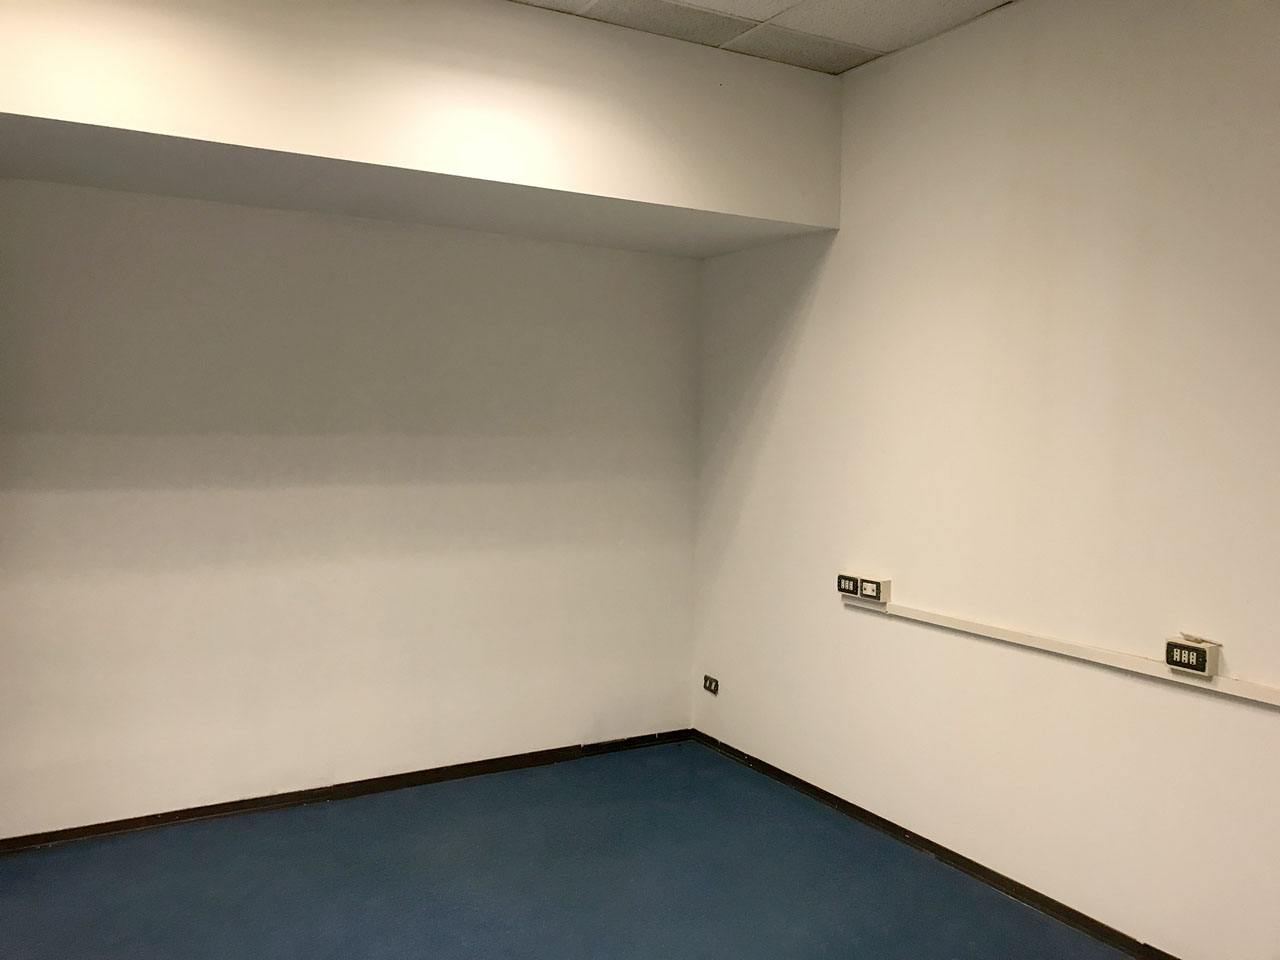 Space 3 - Warehouse to rent in Milan - 100 sqm (1076 sqft) - Atlantic Business Center